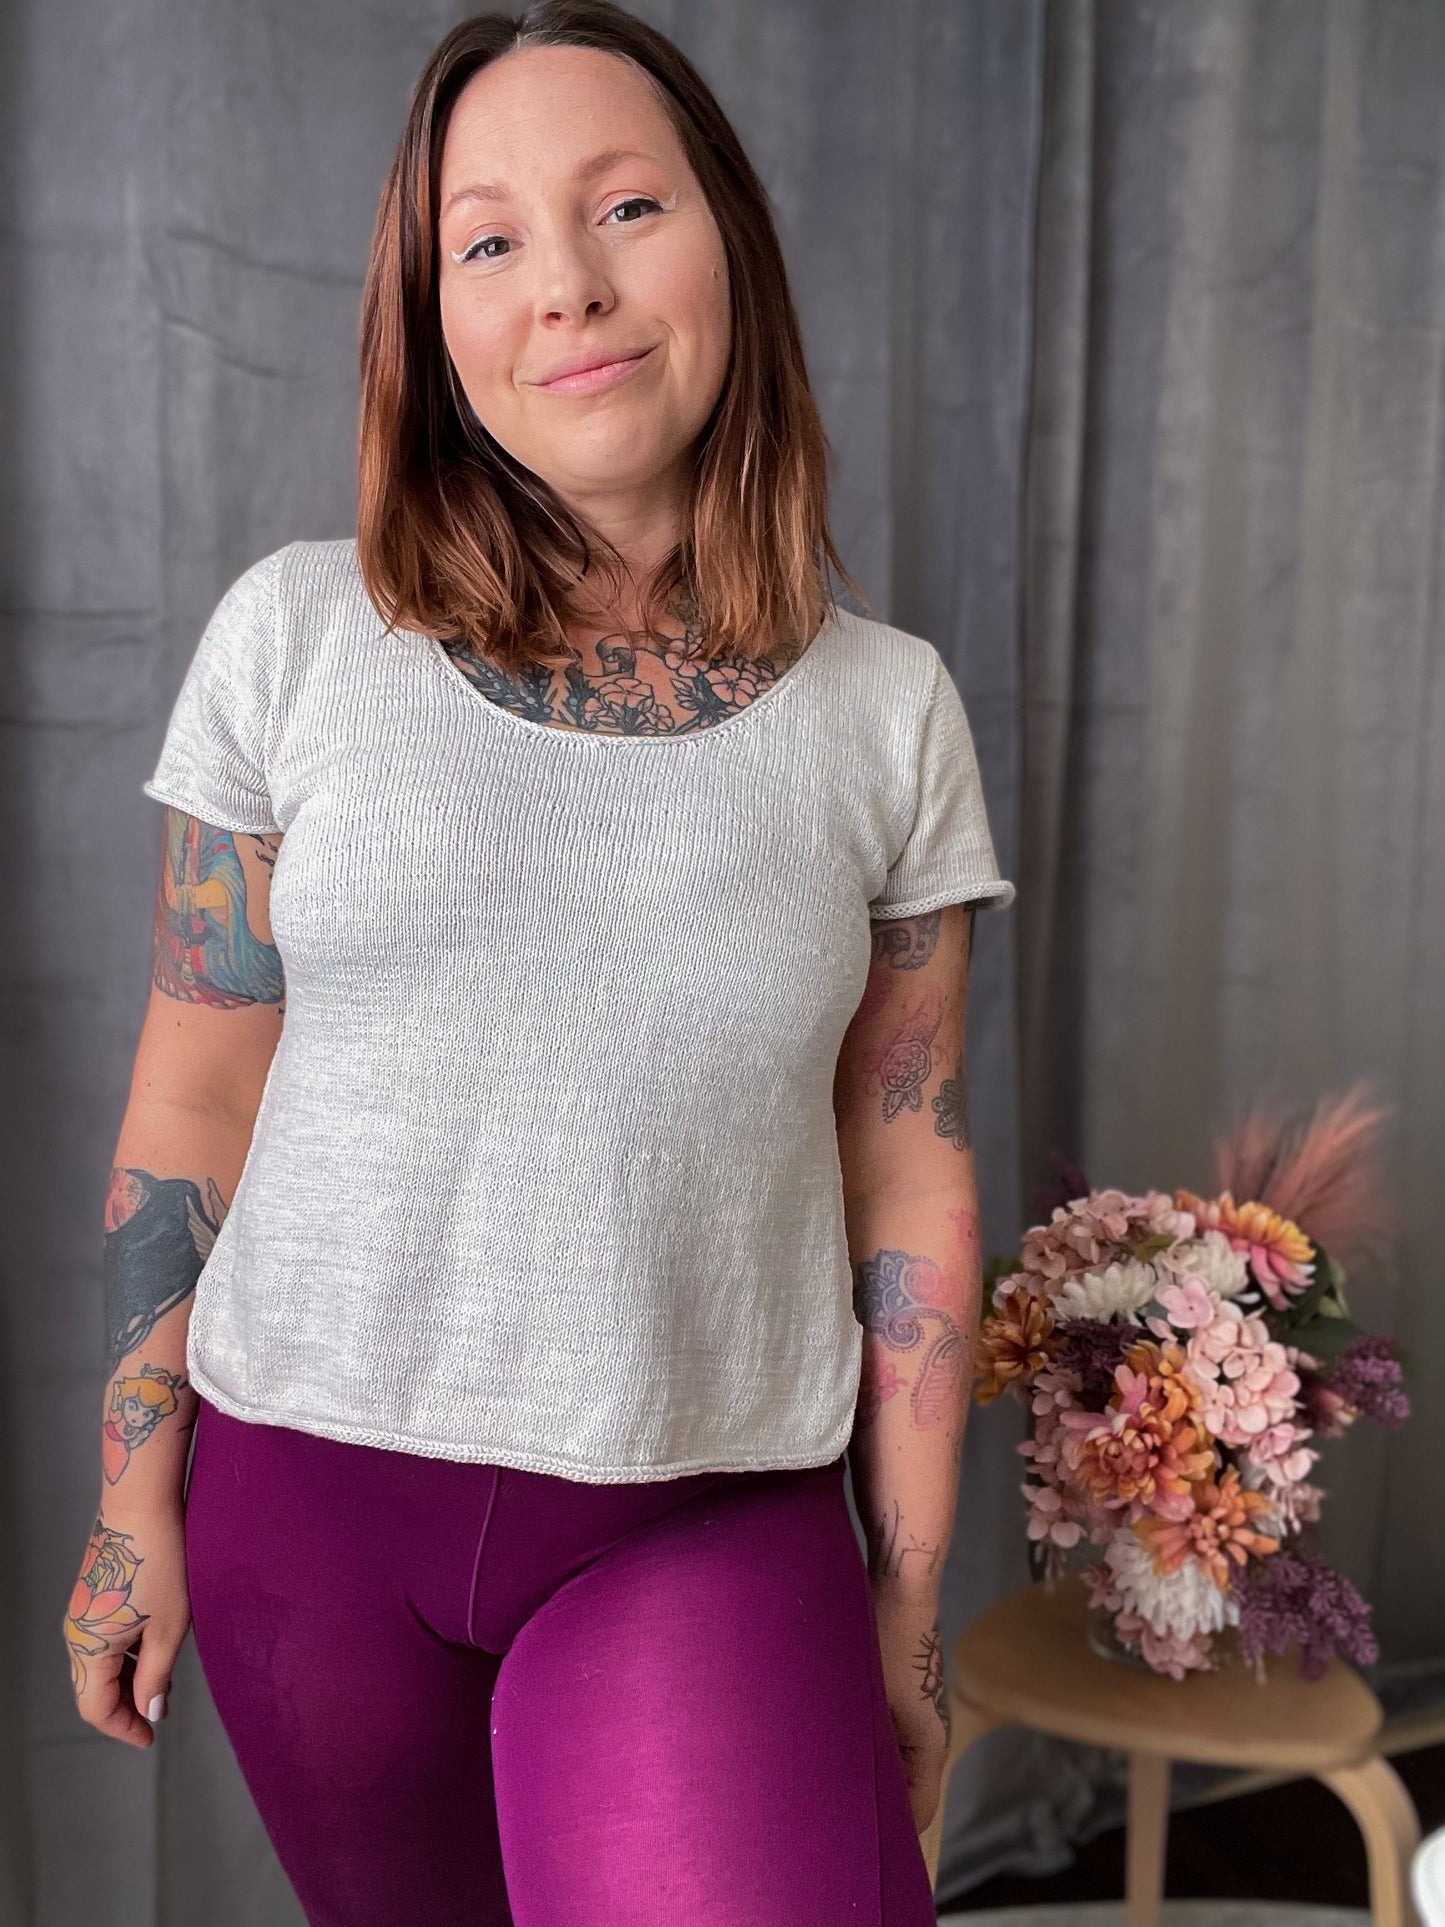 Bess smiles at the camera, wearing a white knit tee with magenta leggings. Flowers on a coffee table can be seen in the background.